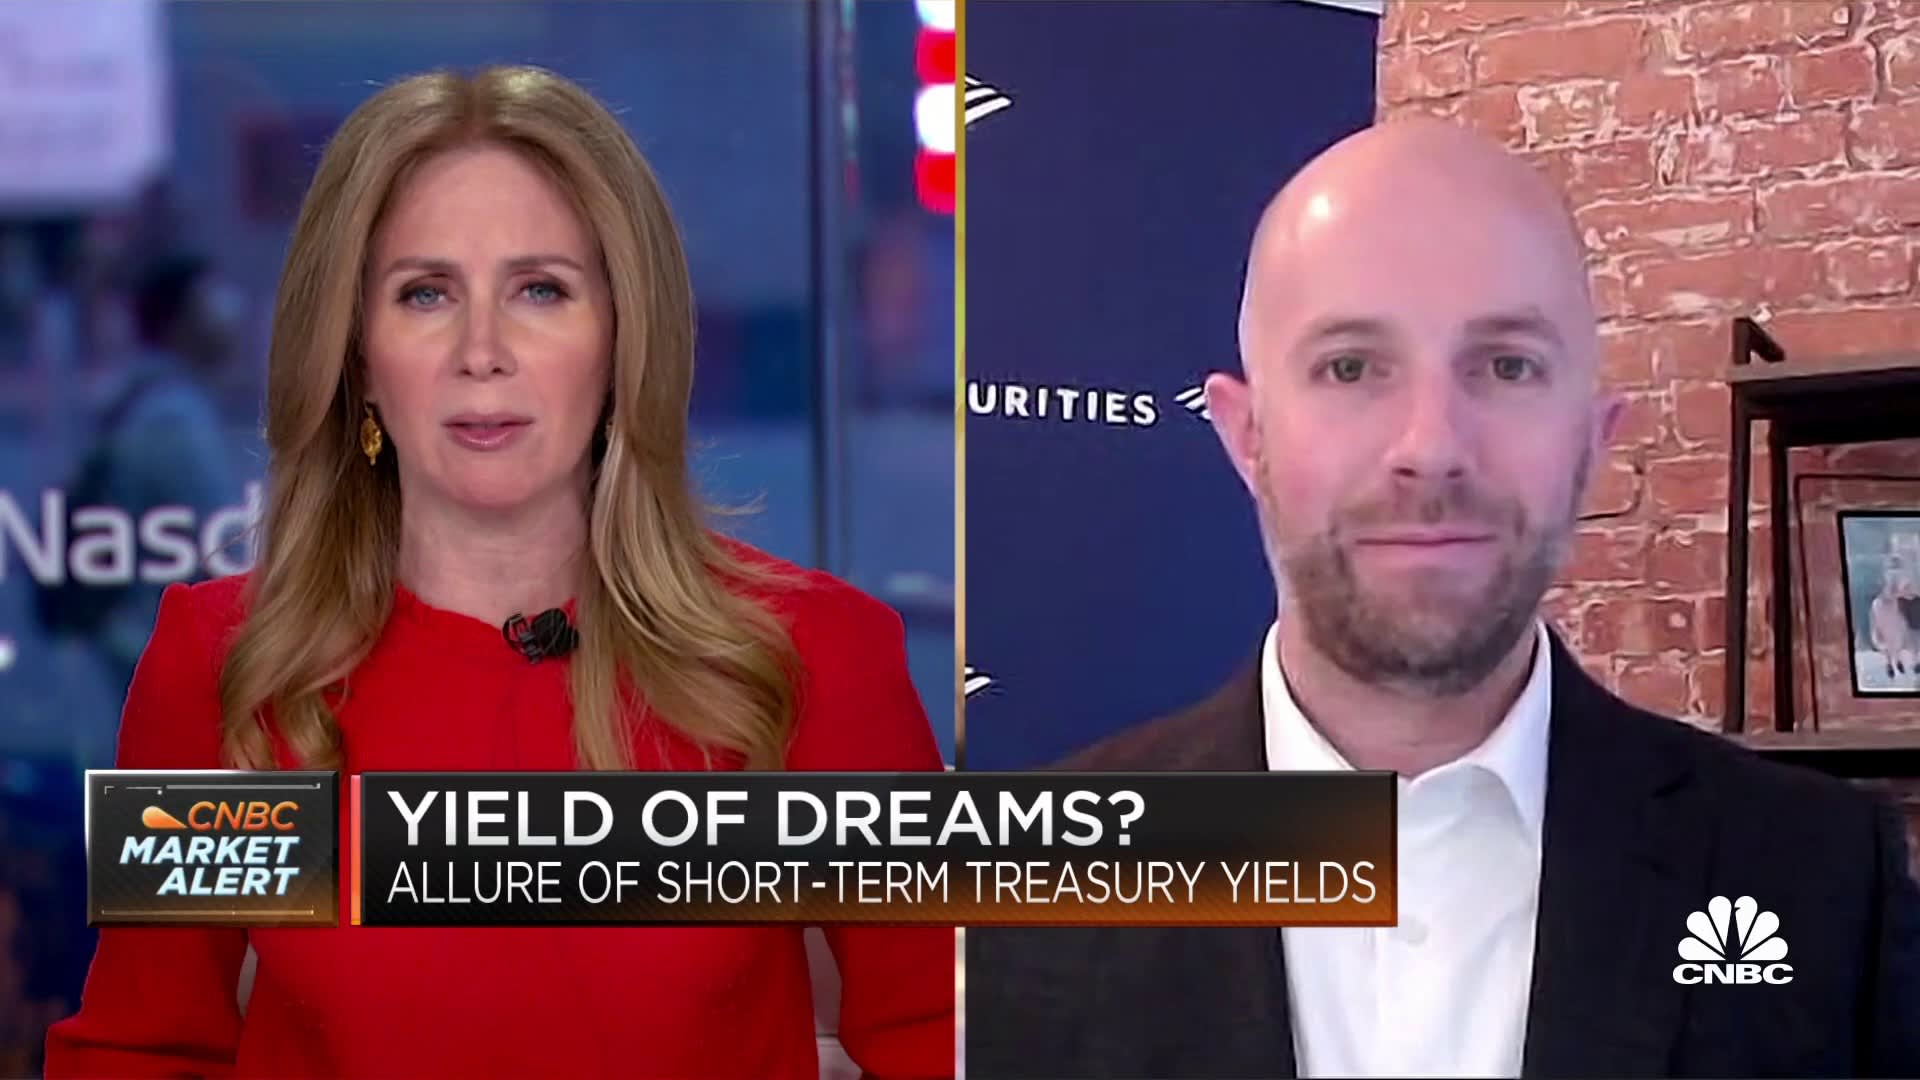 Short-term Treasury yields 'a reflection of debt ceiling concerns': Bank of America's Mark Cabana